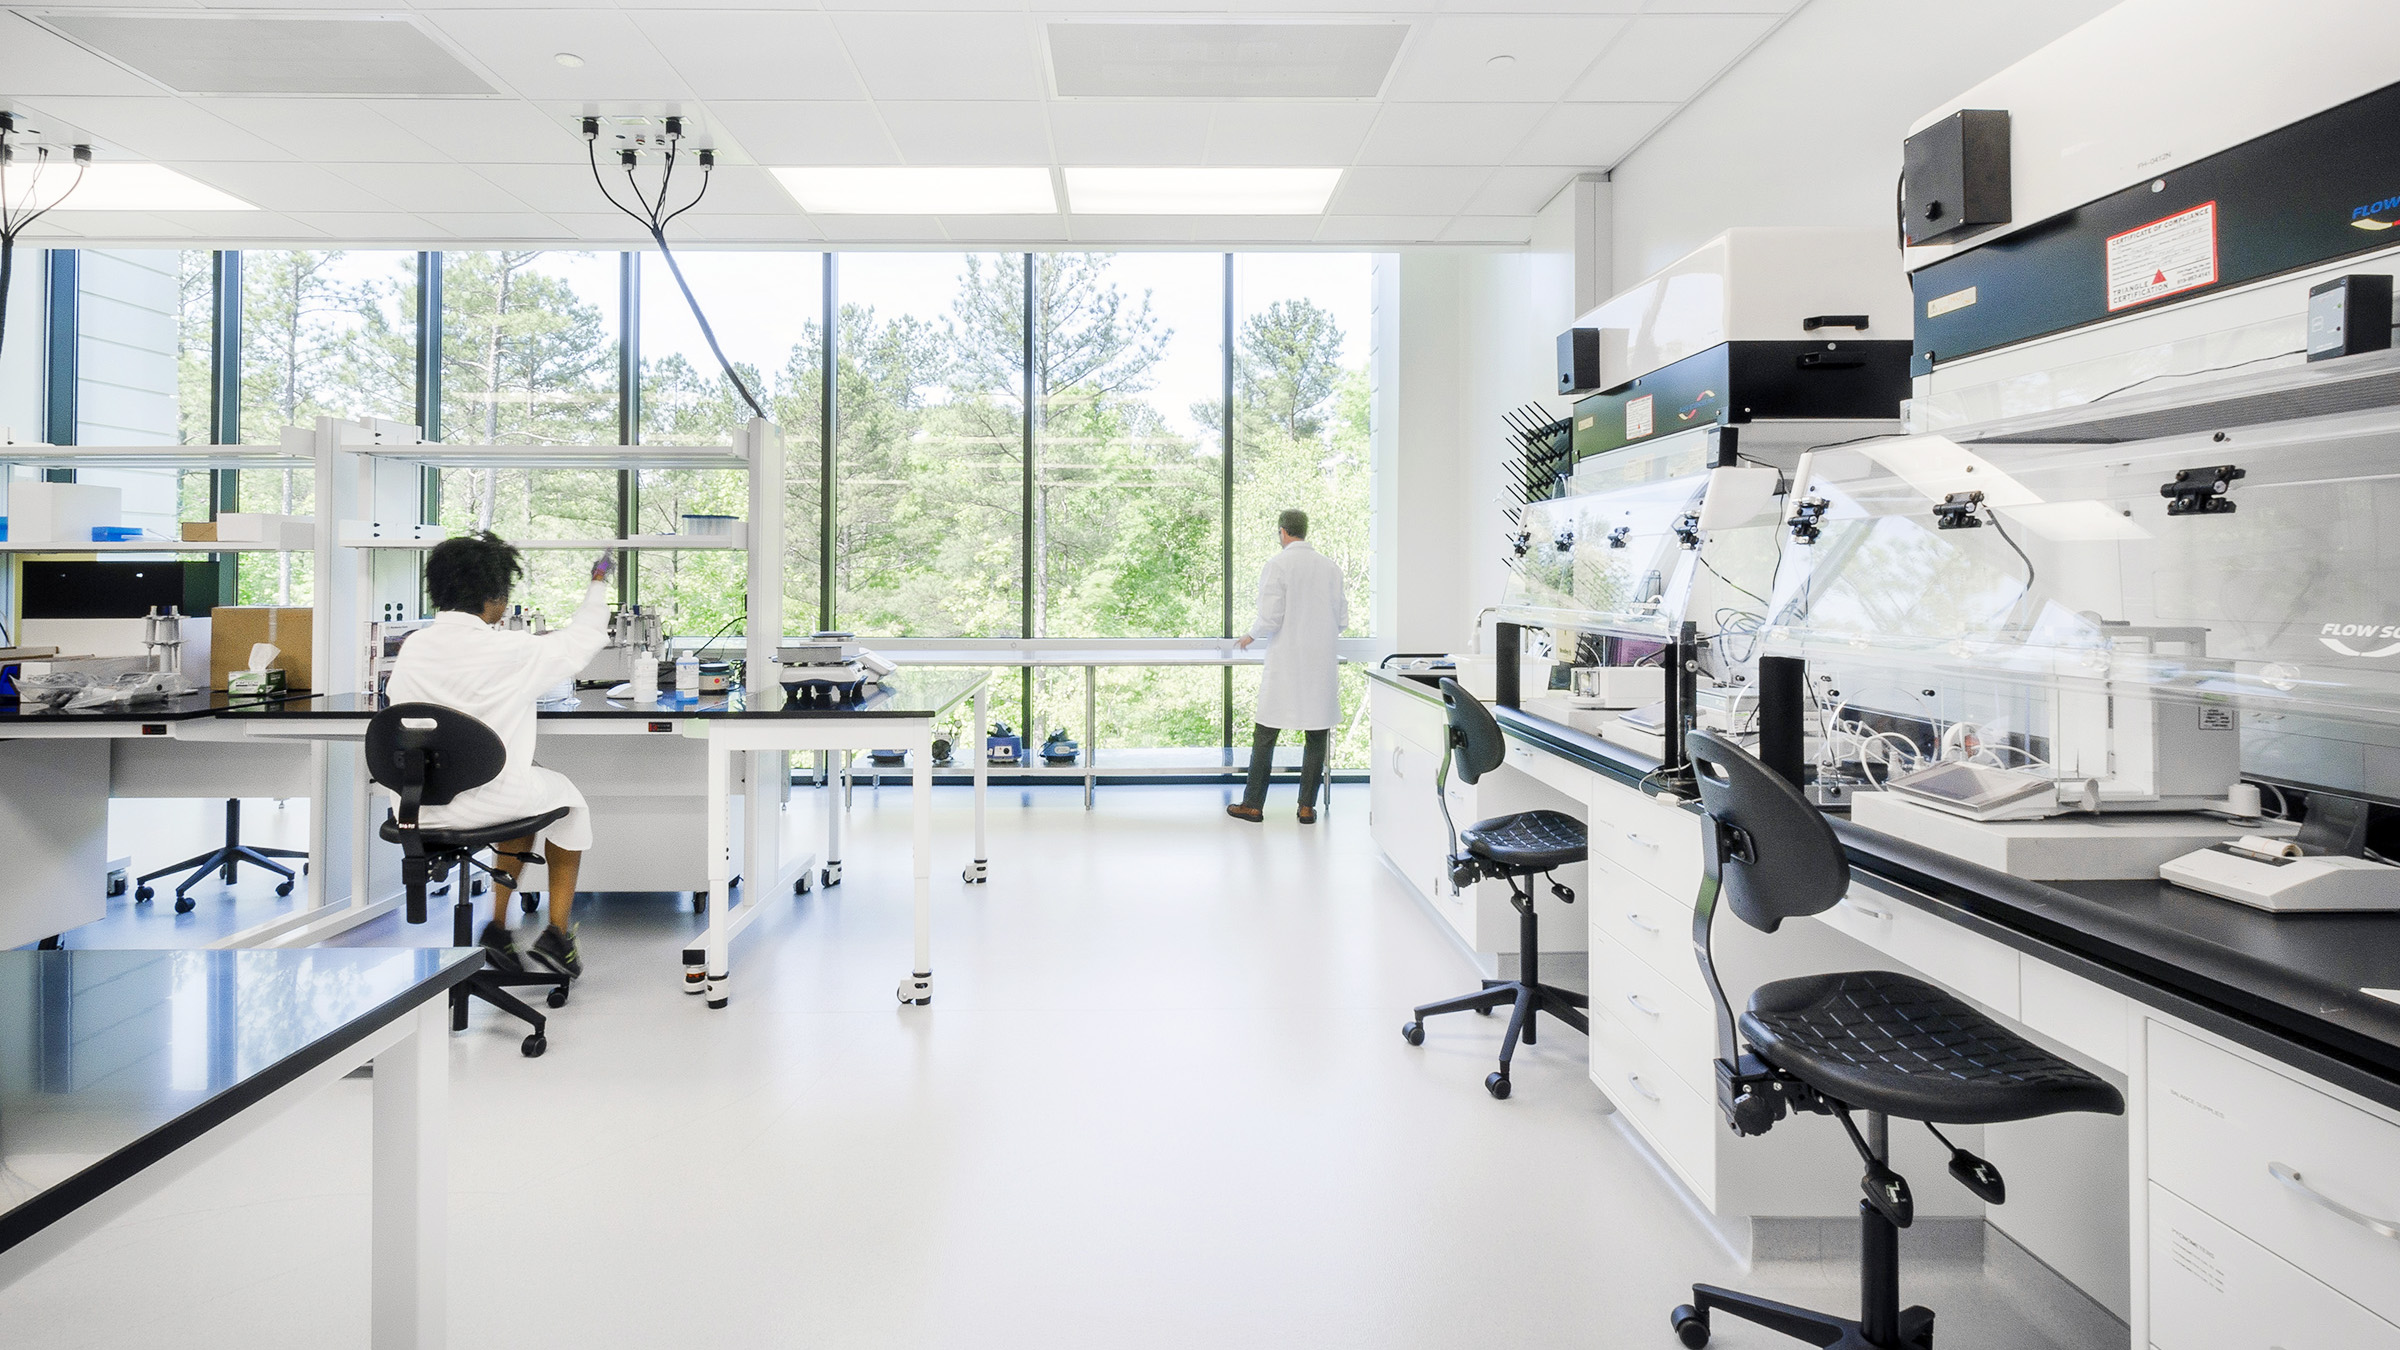 An electrical engineer's take on designing successful Pharmaceutical lab space